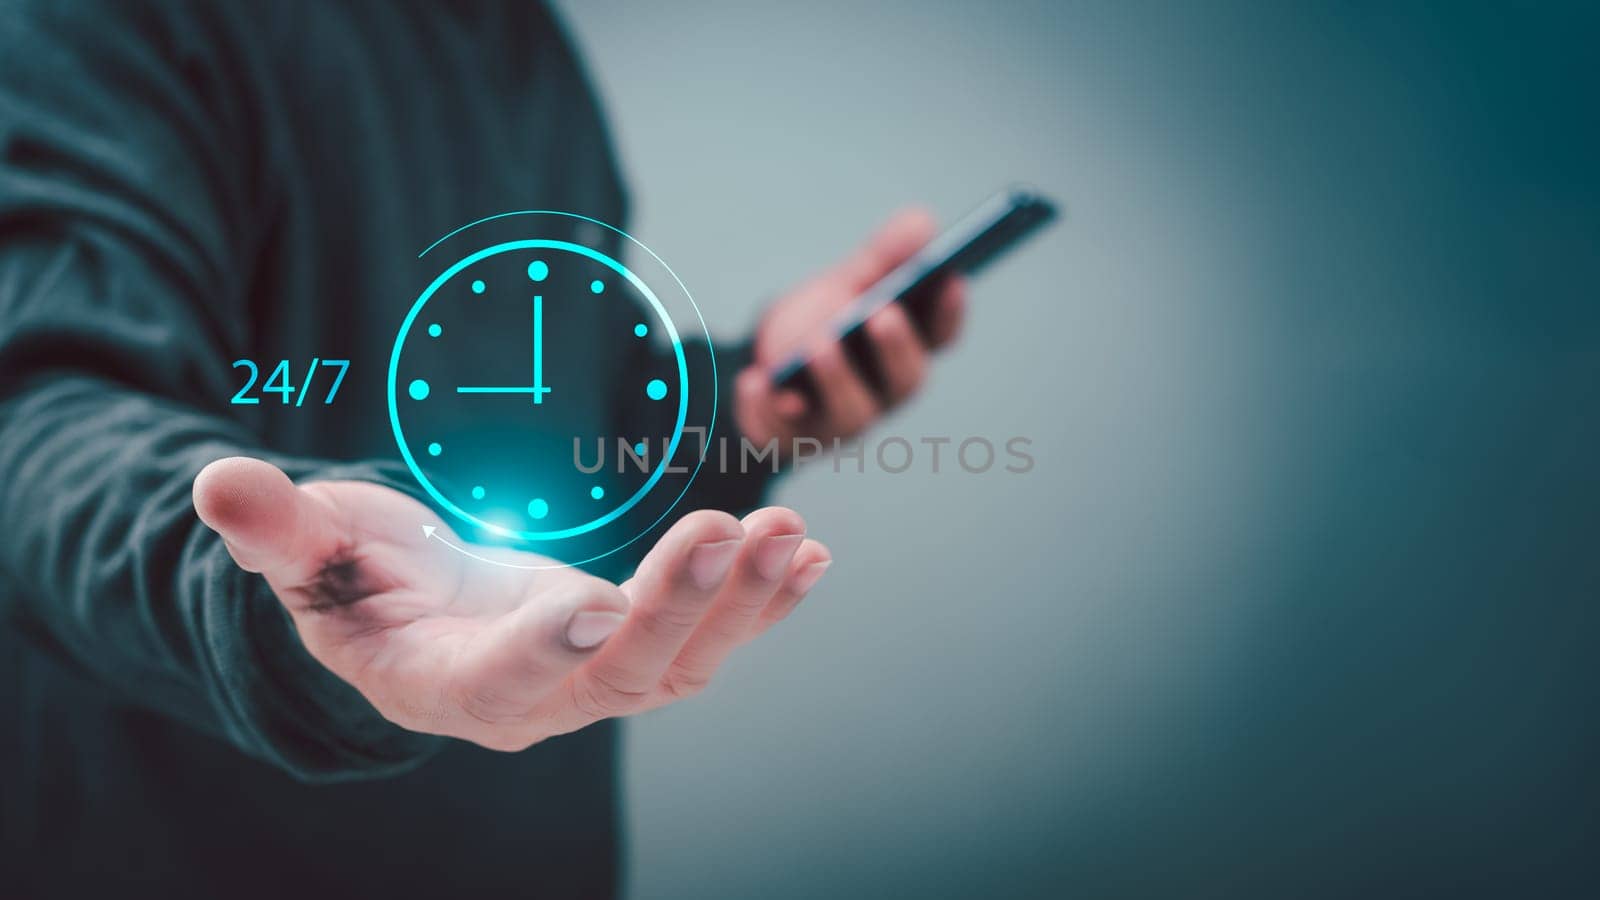 work 24hour and 7 day icon virtual screen hologram, 24hour open, 24 hour payment online banking, shopping, transection online service server cloud running. by Unimages2527